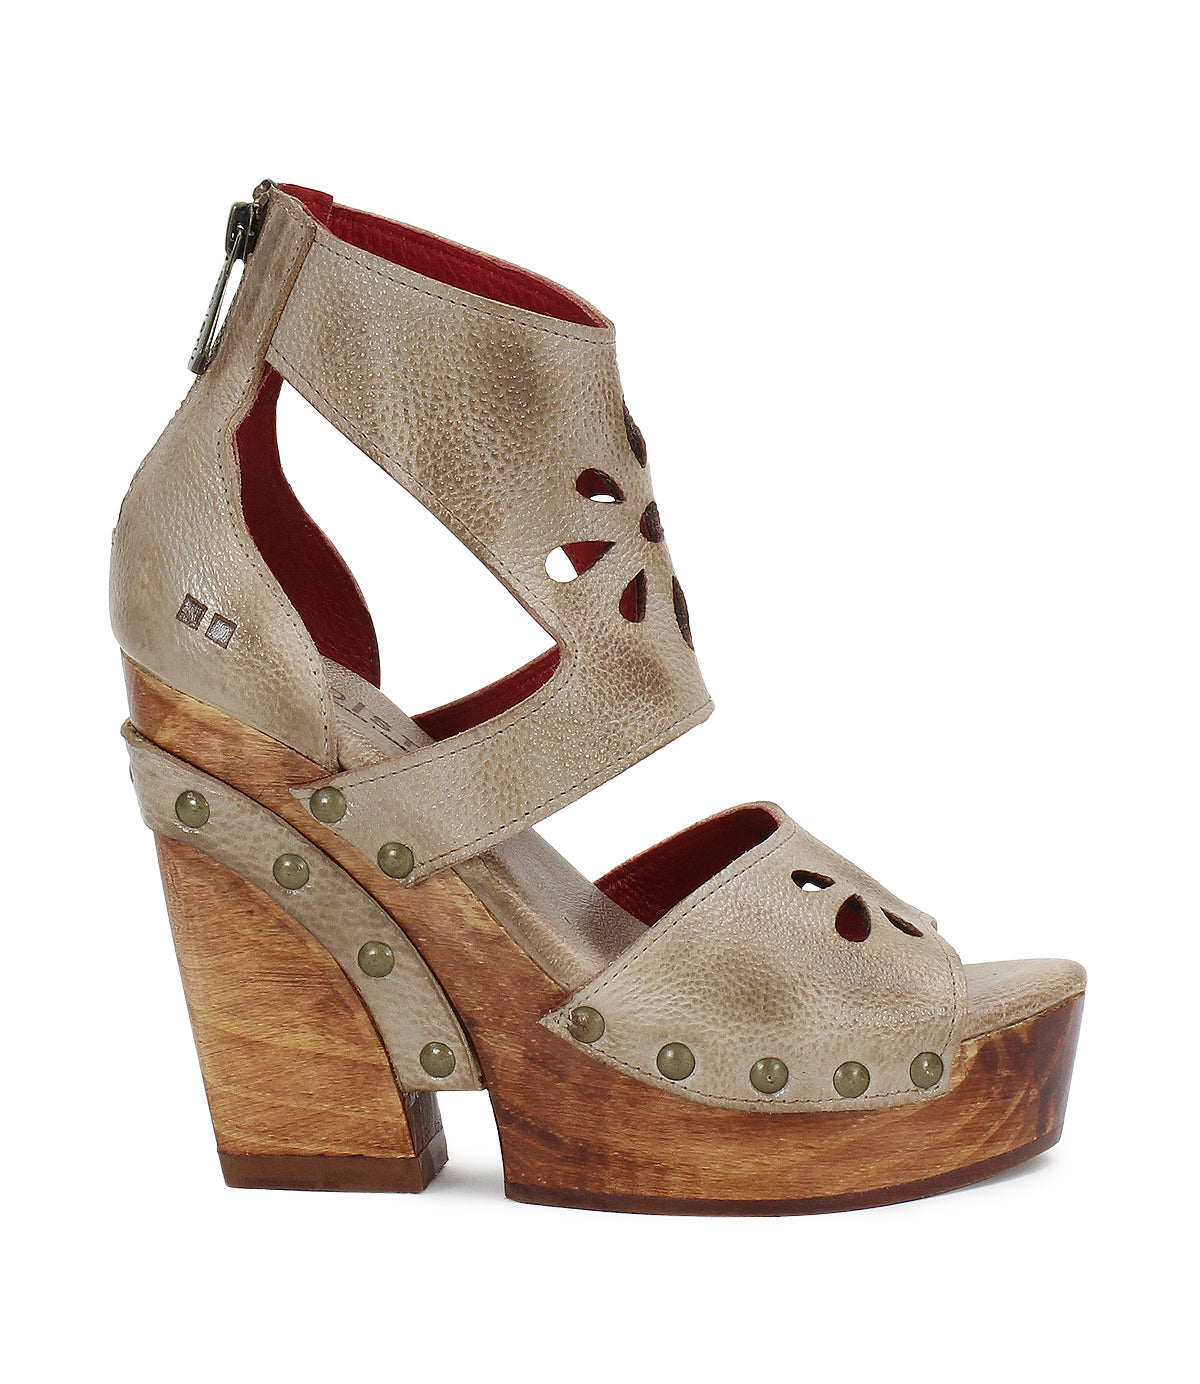 A women's sandal with wooden platform and cut outs from Bed Stu's Lucrative.